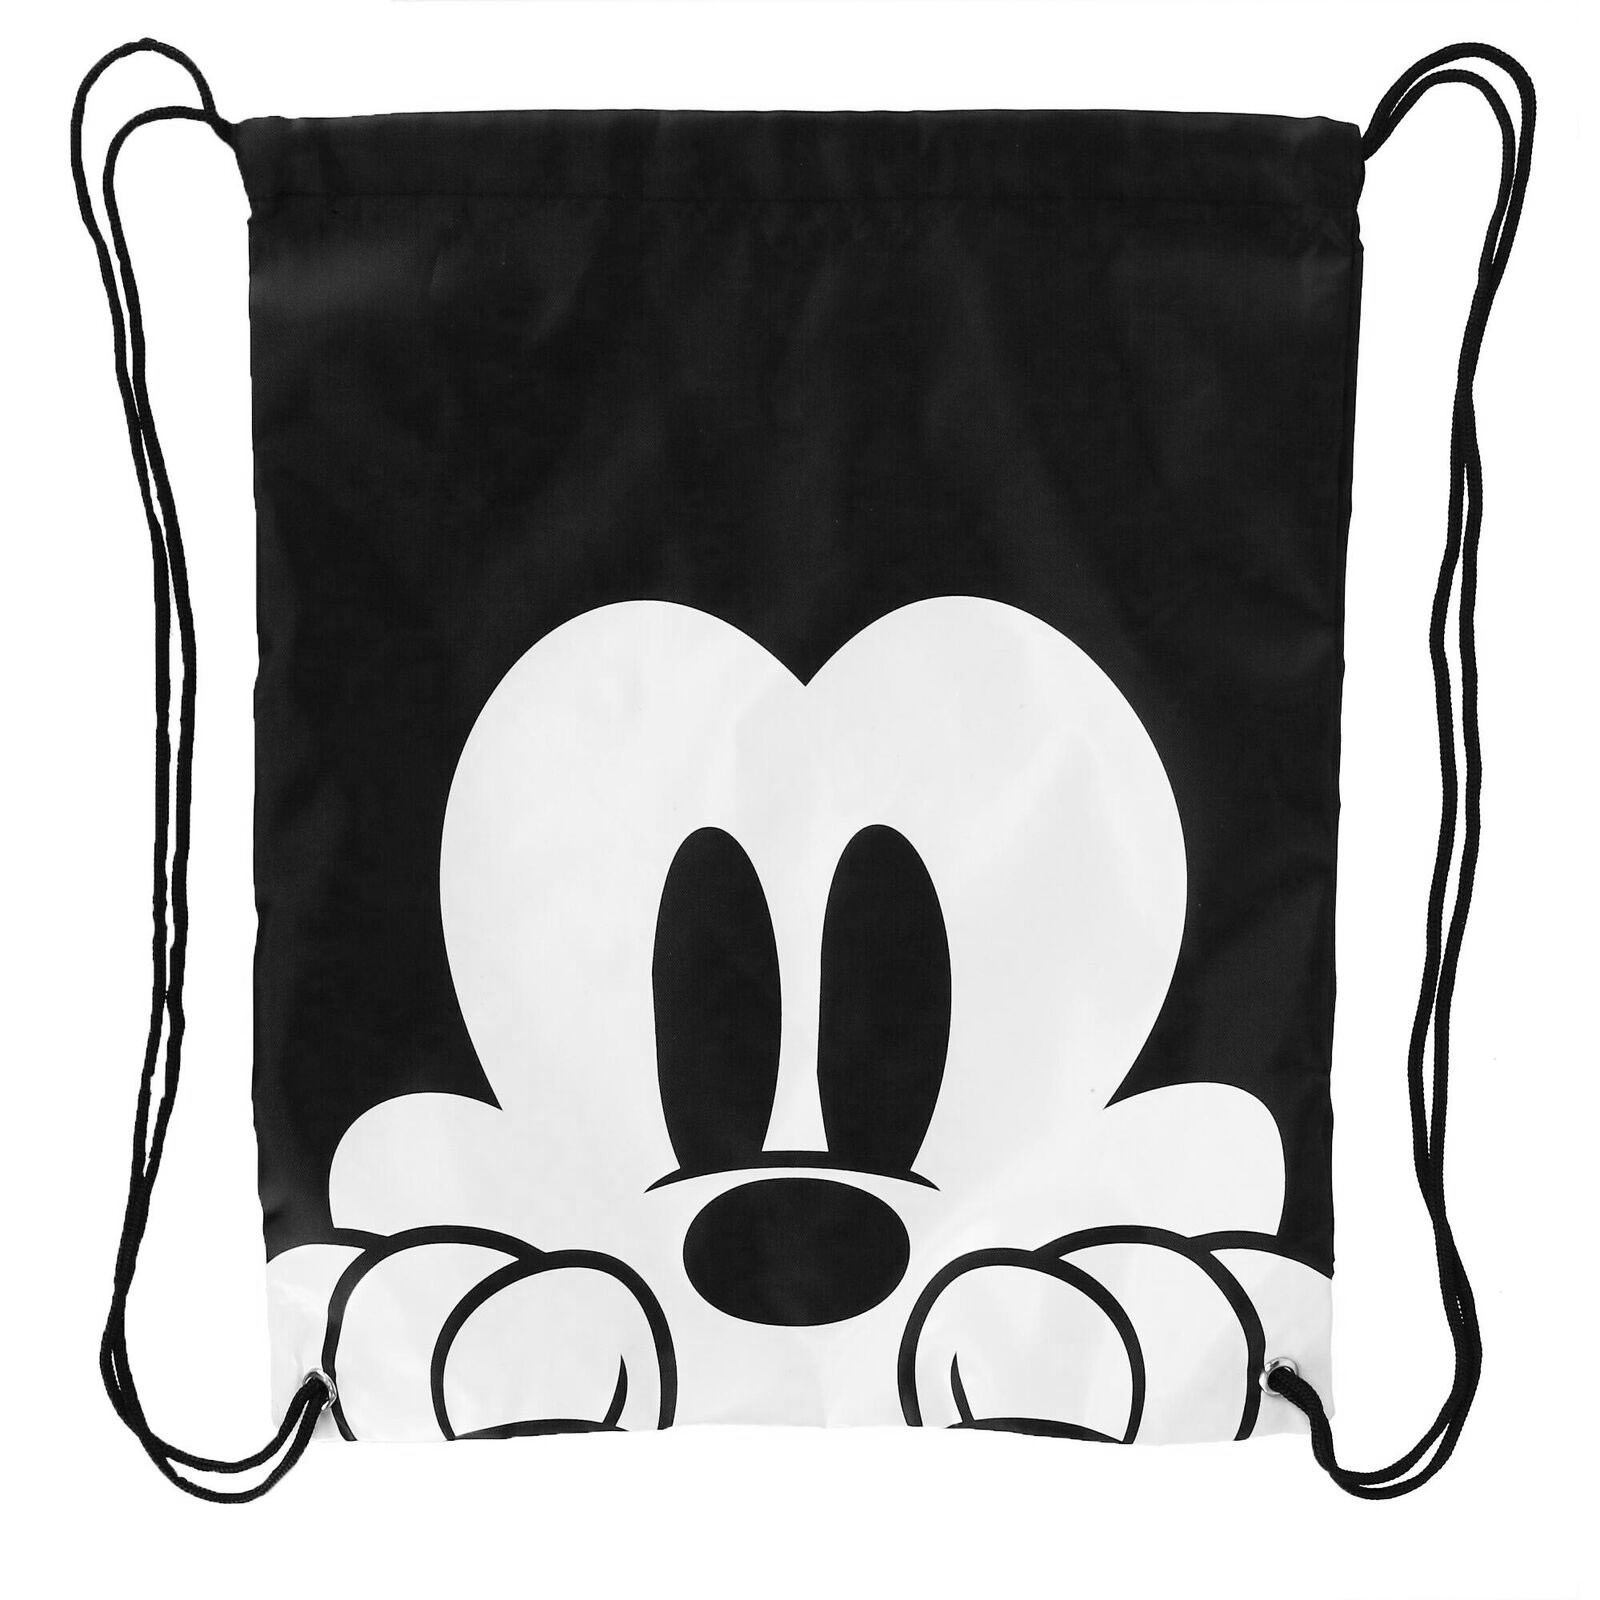 black and white mickey mouse face